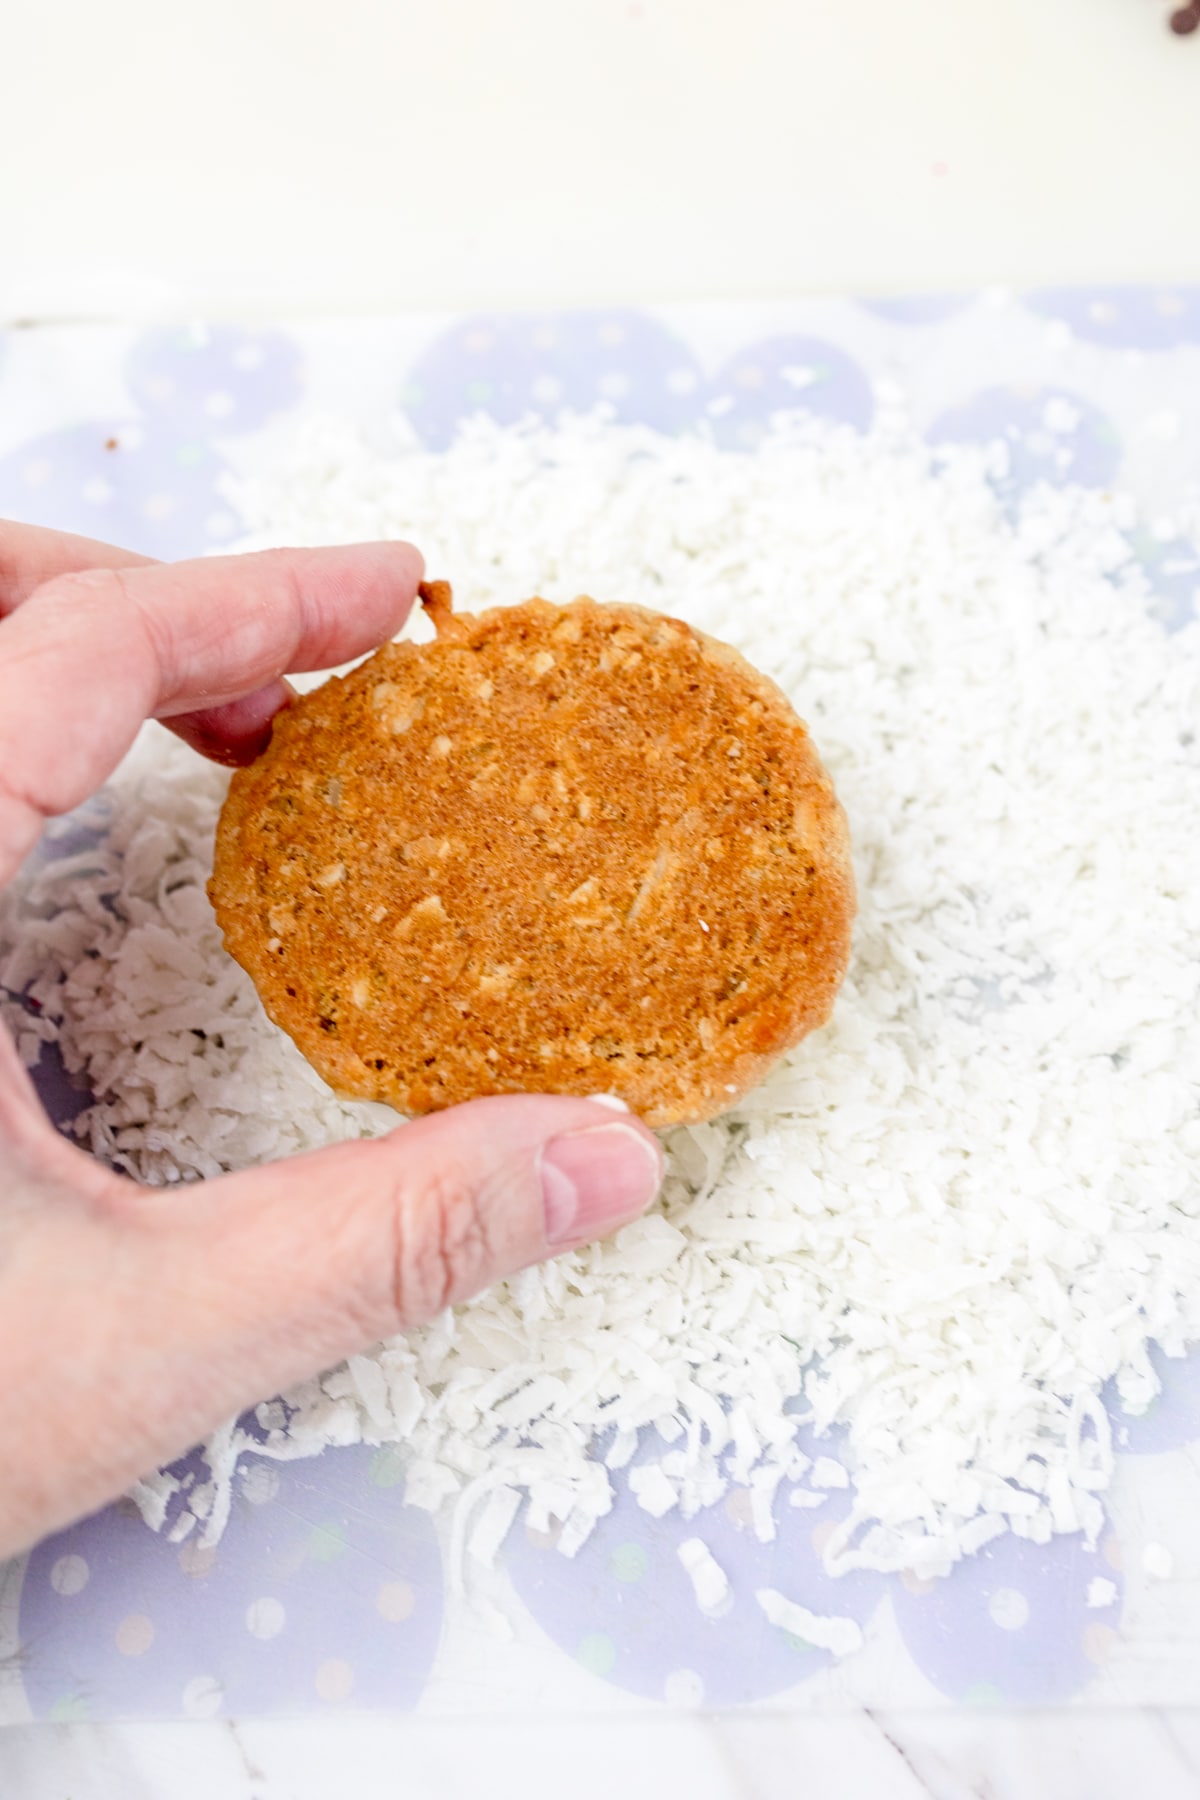 Top view of a hand dipping an oatmeal cookie into a pile pf shredded coconut. 